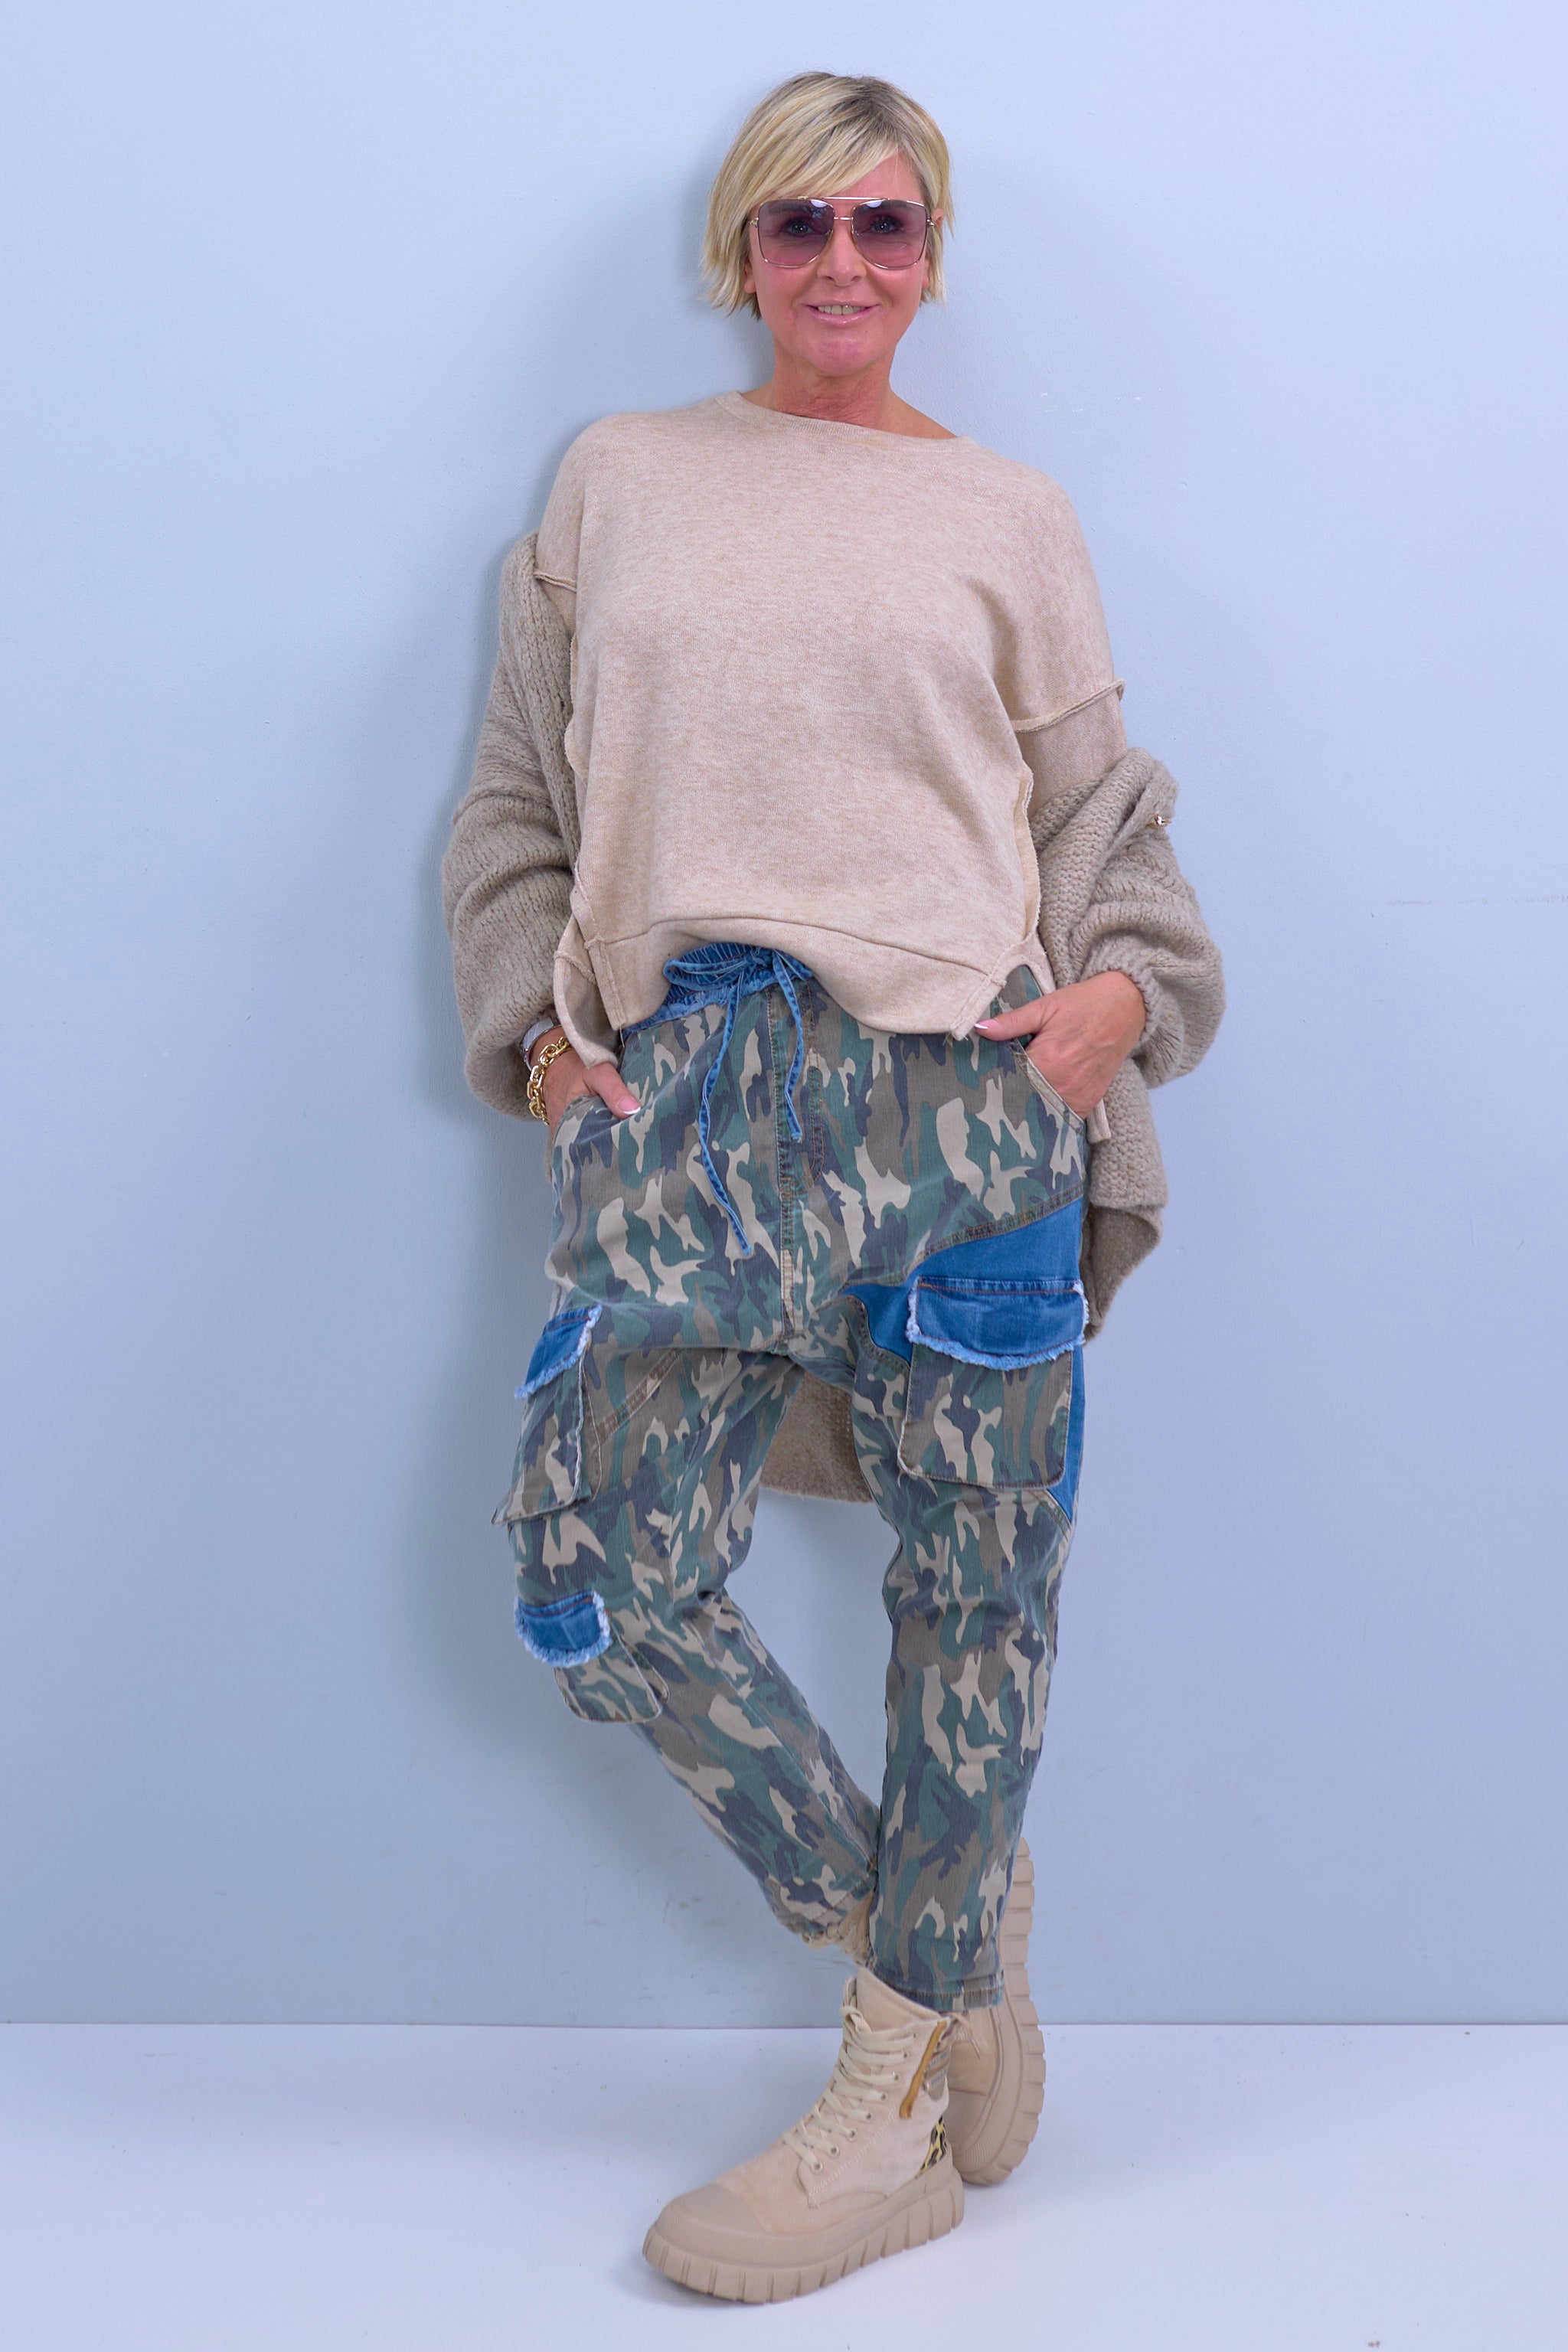 Baggy Jeans, camouflage